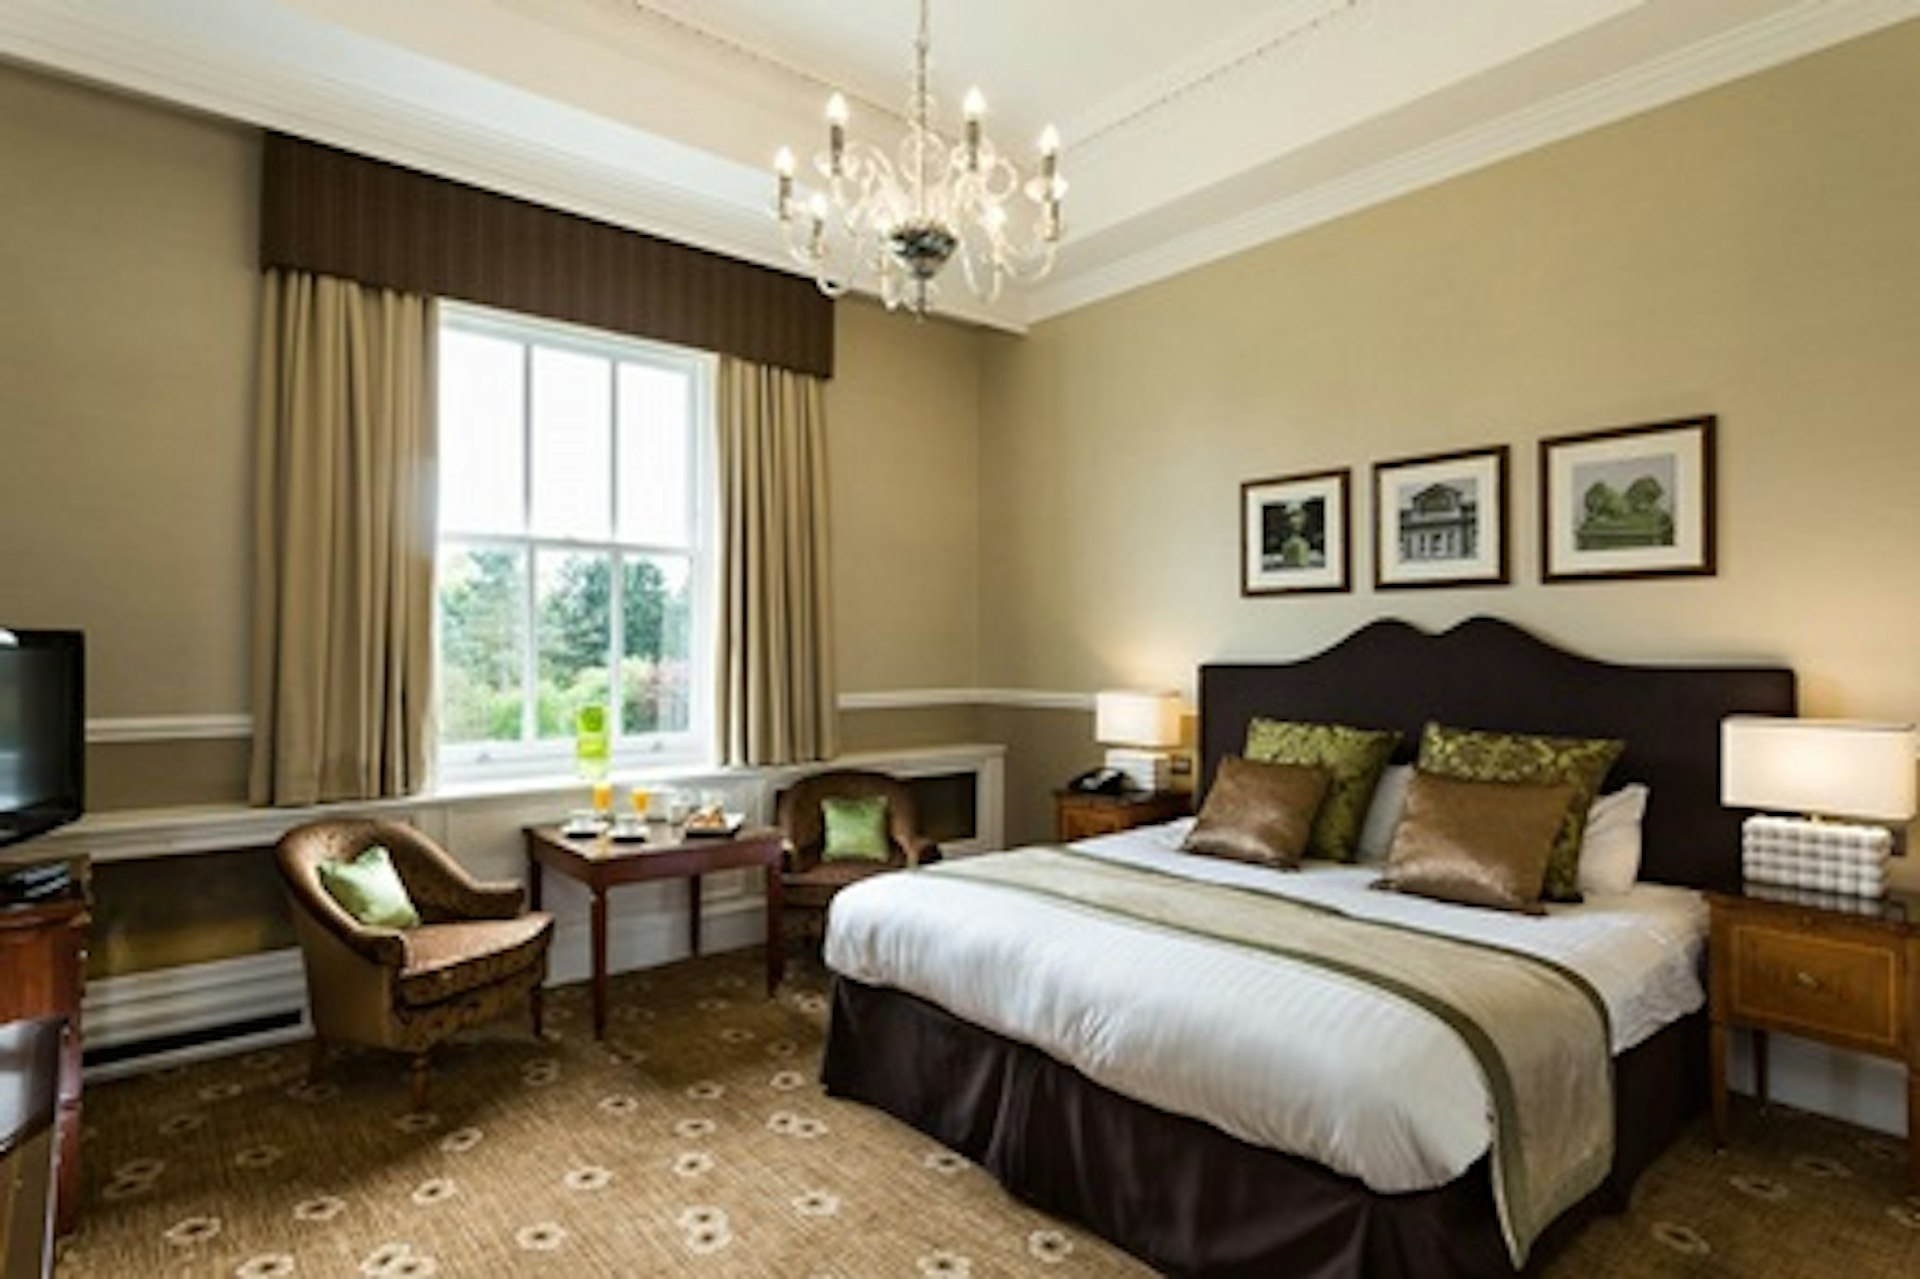 One Night Break in an Executive Room for Two at the Down Hall Hotel & Spa 1